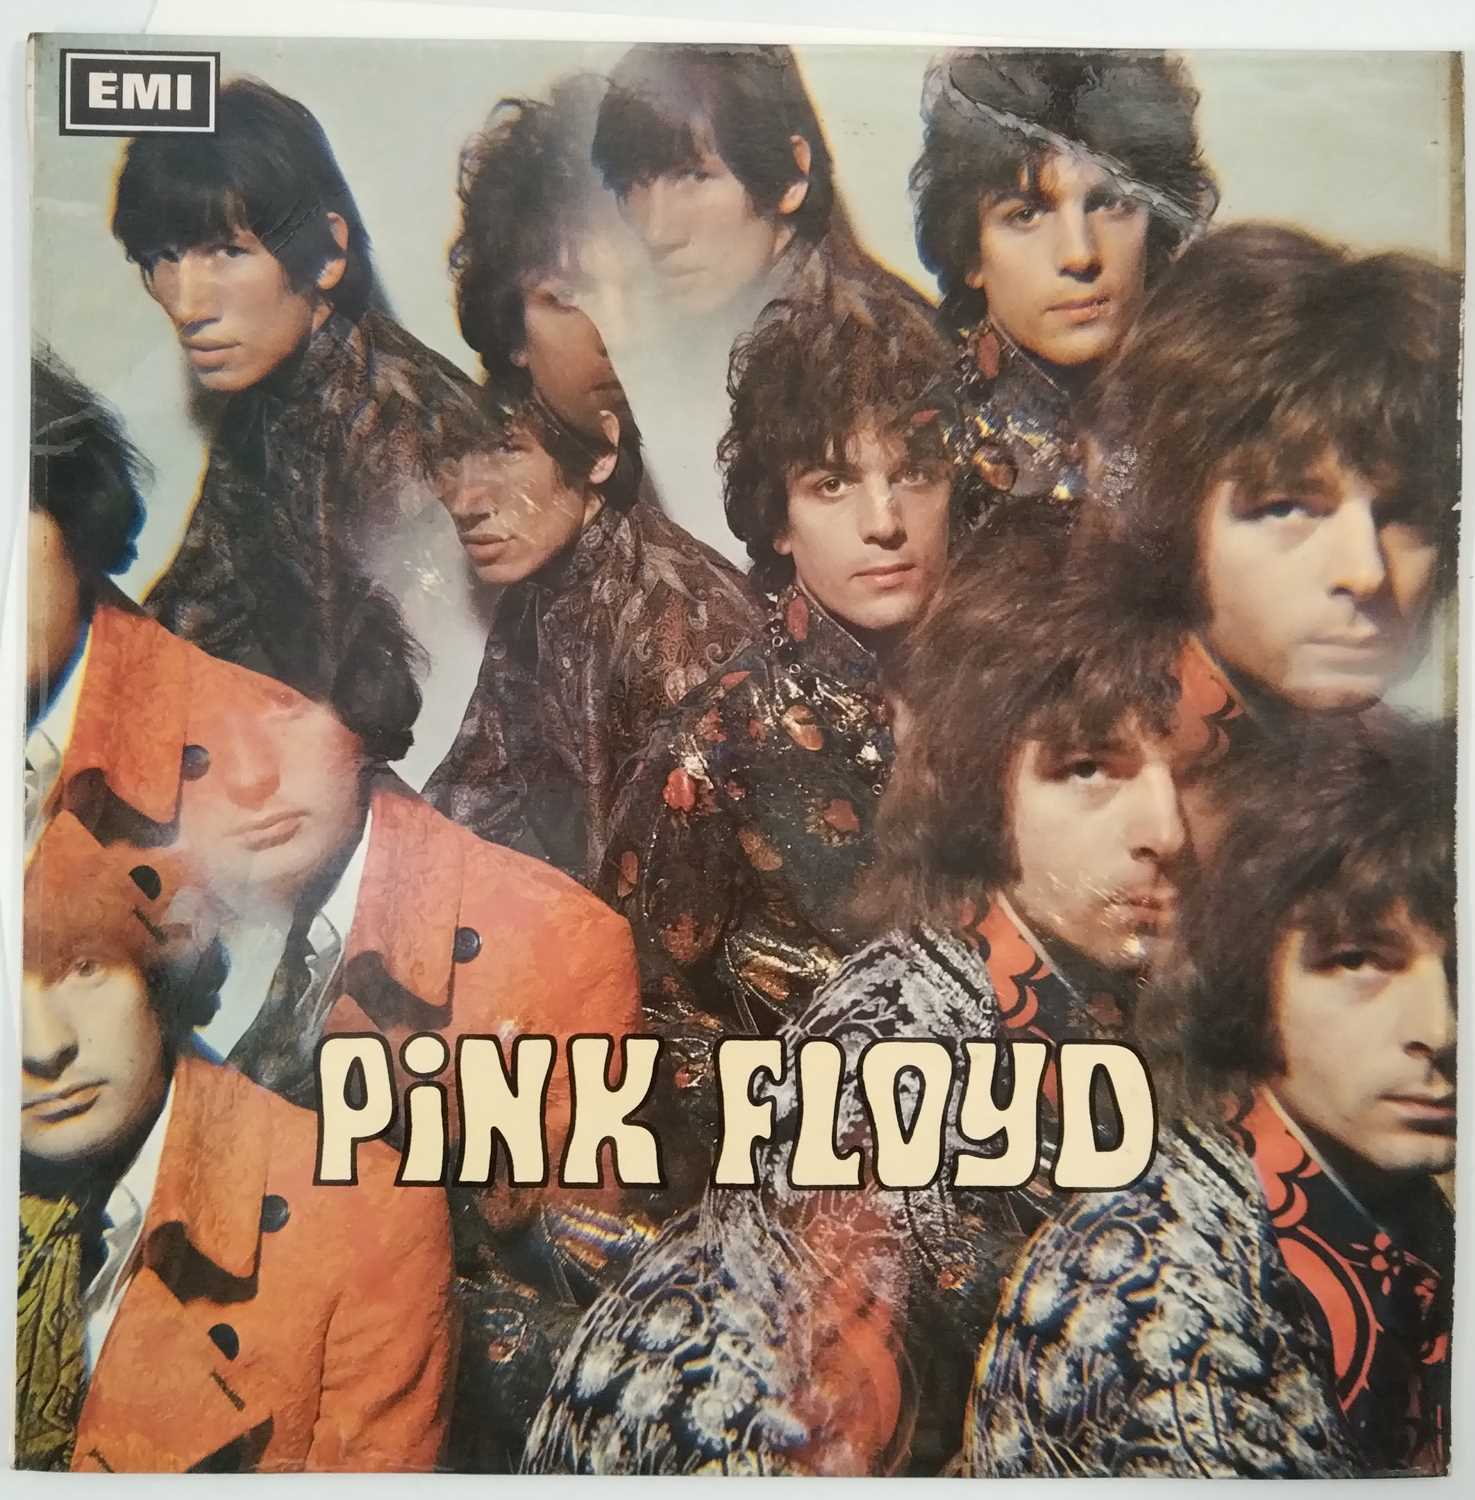 Lot 2 - THE PINK FLOYD - THE PIPER AT THE GATES OF DAWN LP (KENYA EXPORT COPY - PARLOPHONE SCX 6157)